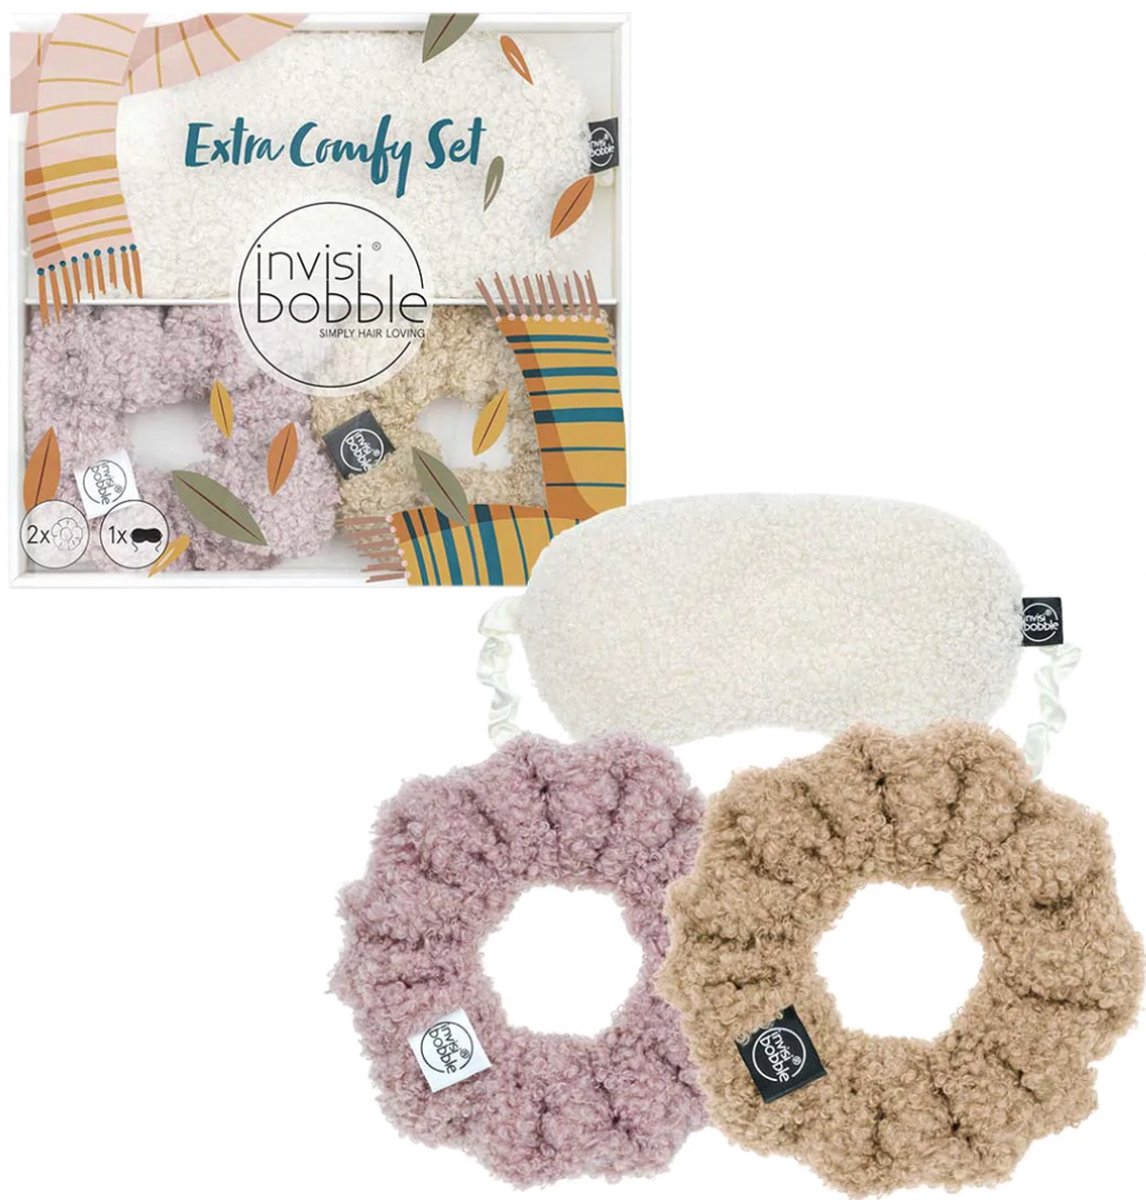 invisibobble - Extra Comfy Sprunchie and Sleeping Mask Set